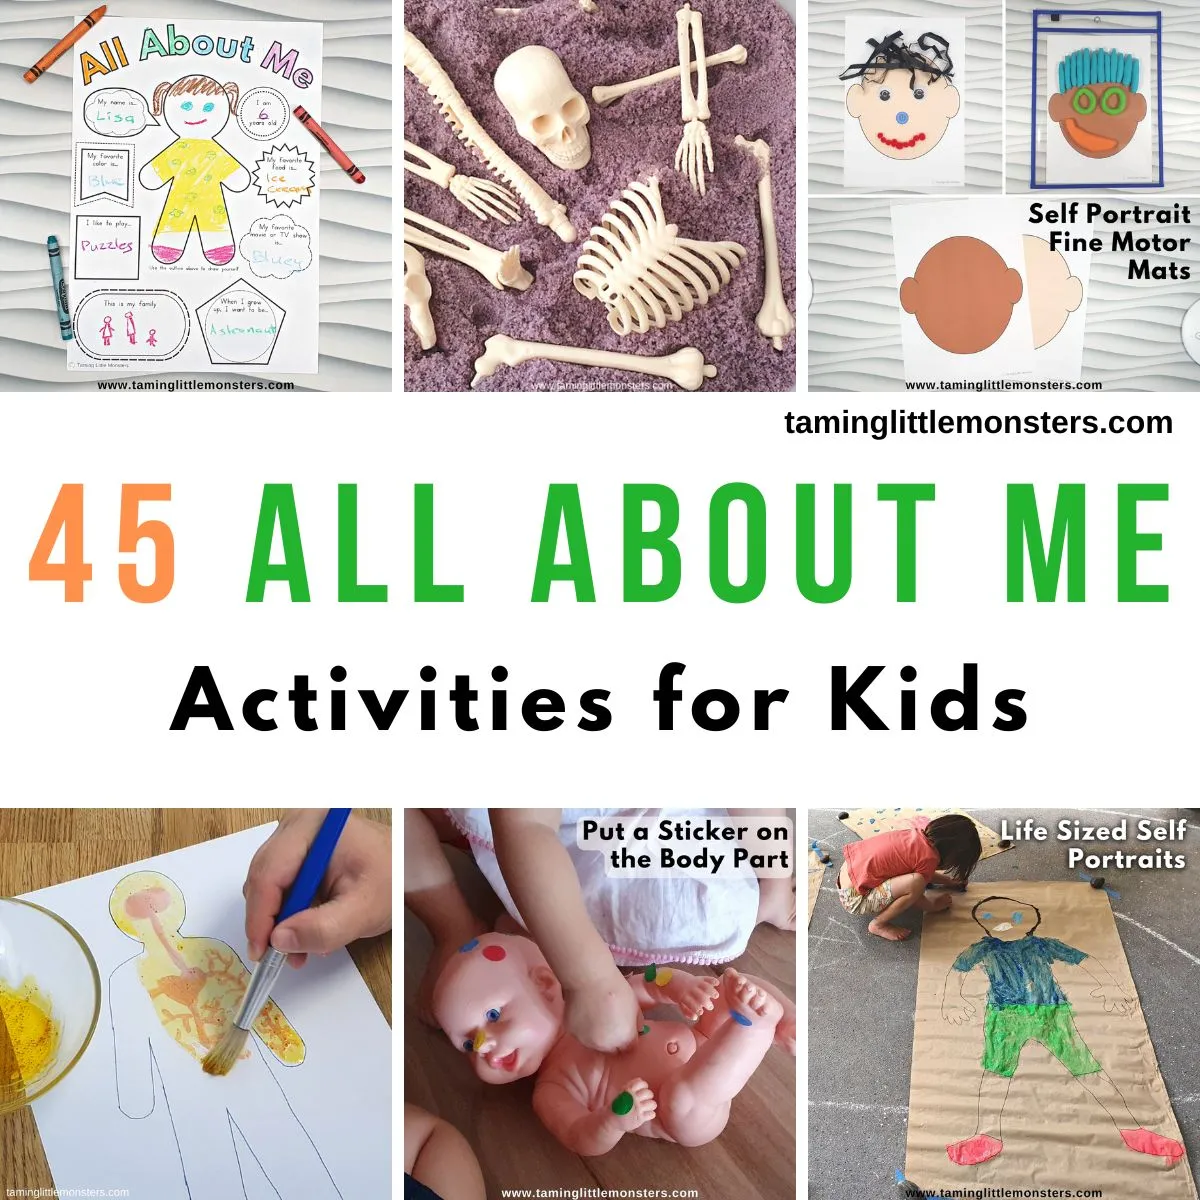 Sticker Shapes Fine Motor Activity - Taming Little Monsters